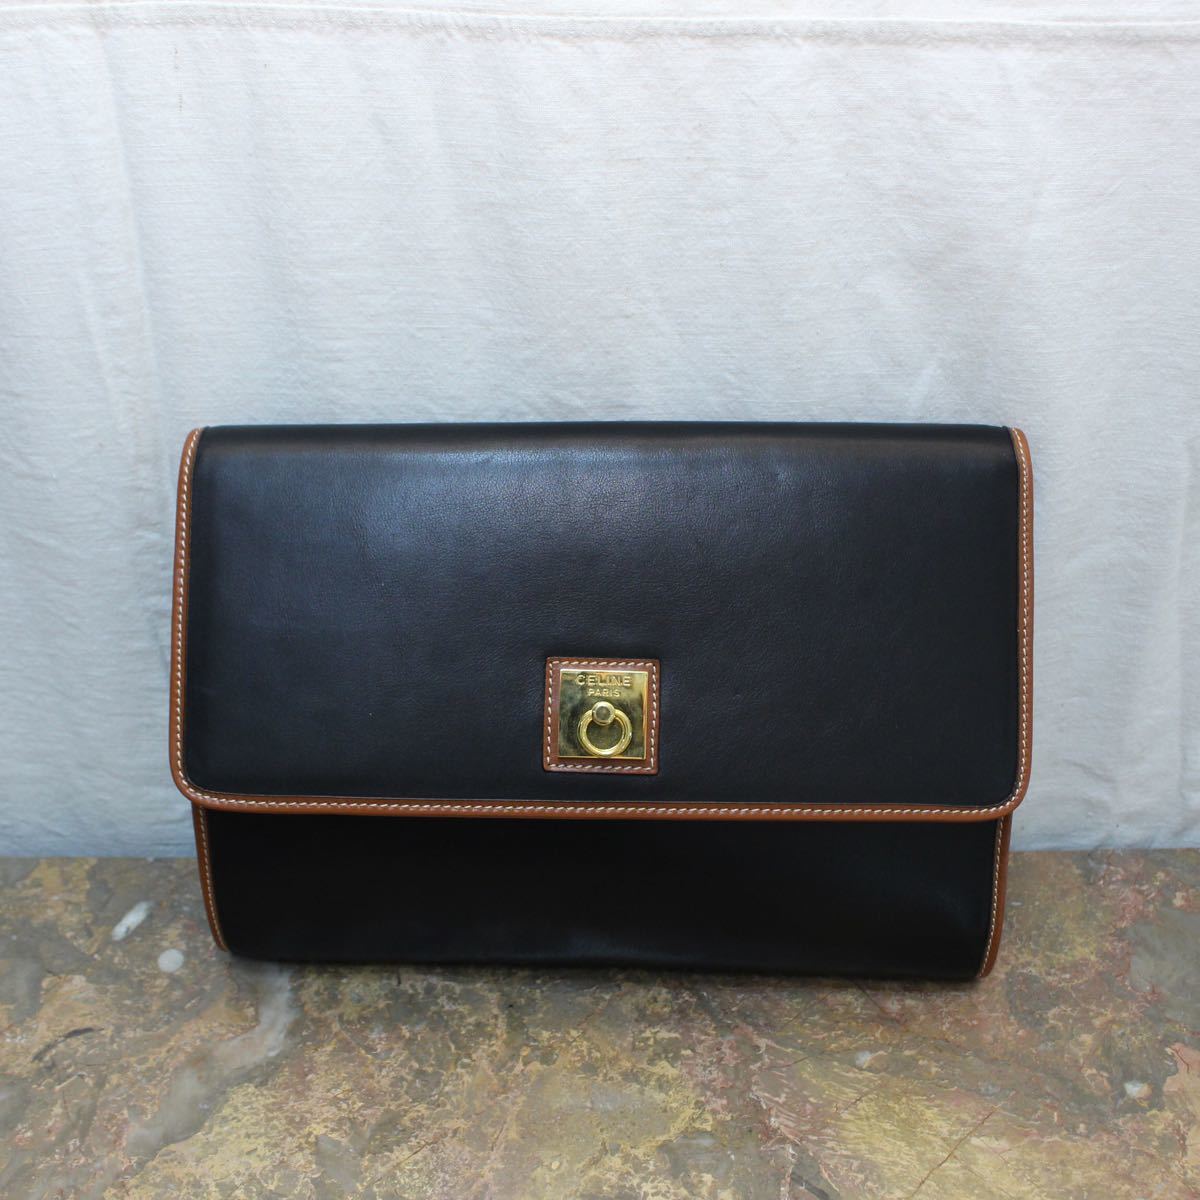 OLD CELINE METAL LOGO LEATHER CLUTCH ITALY BAG オールドセリーヌメタルロゴレザークラッチバッグ 品揃え豊富で チープ IN MADE